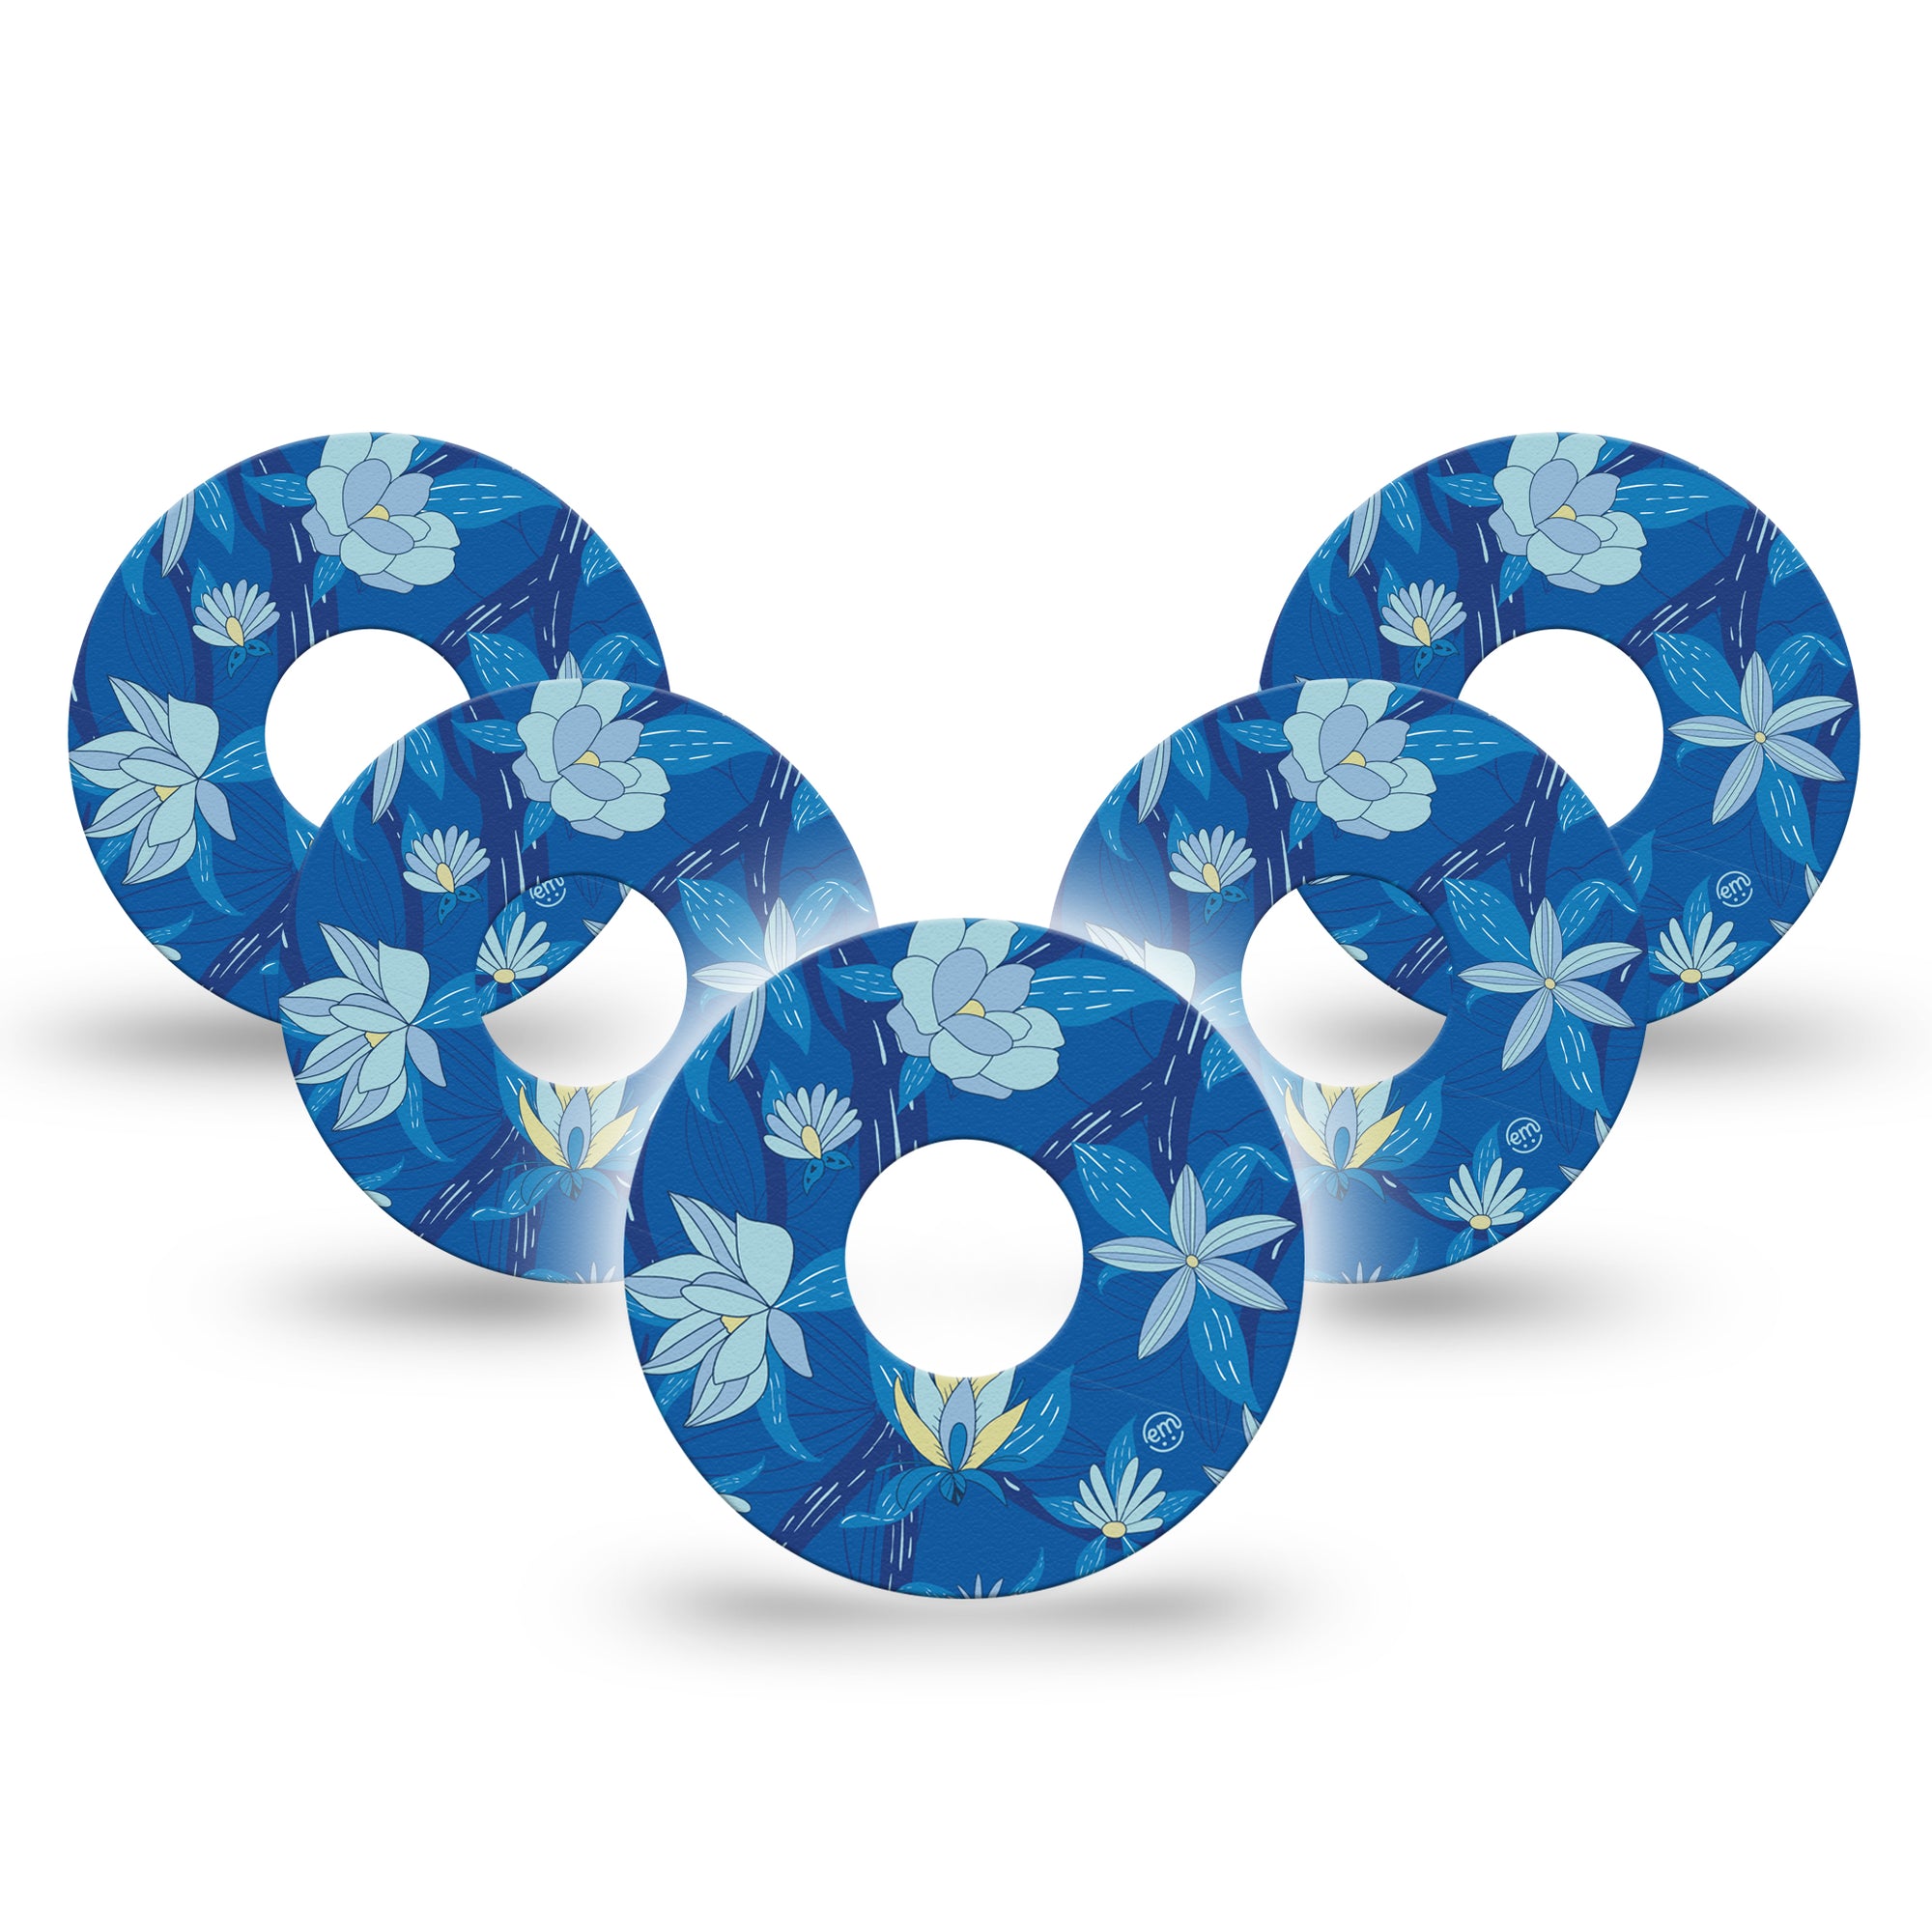 Bold Blue Flowers libre 3 Perfect Fit Patch, 5-Pack, Blue Floral Themed CGM Adhesive Tape Design